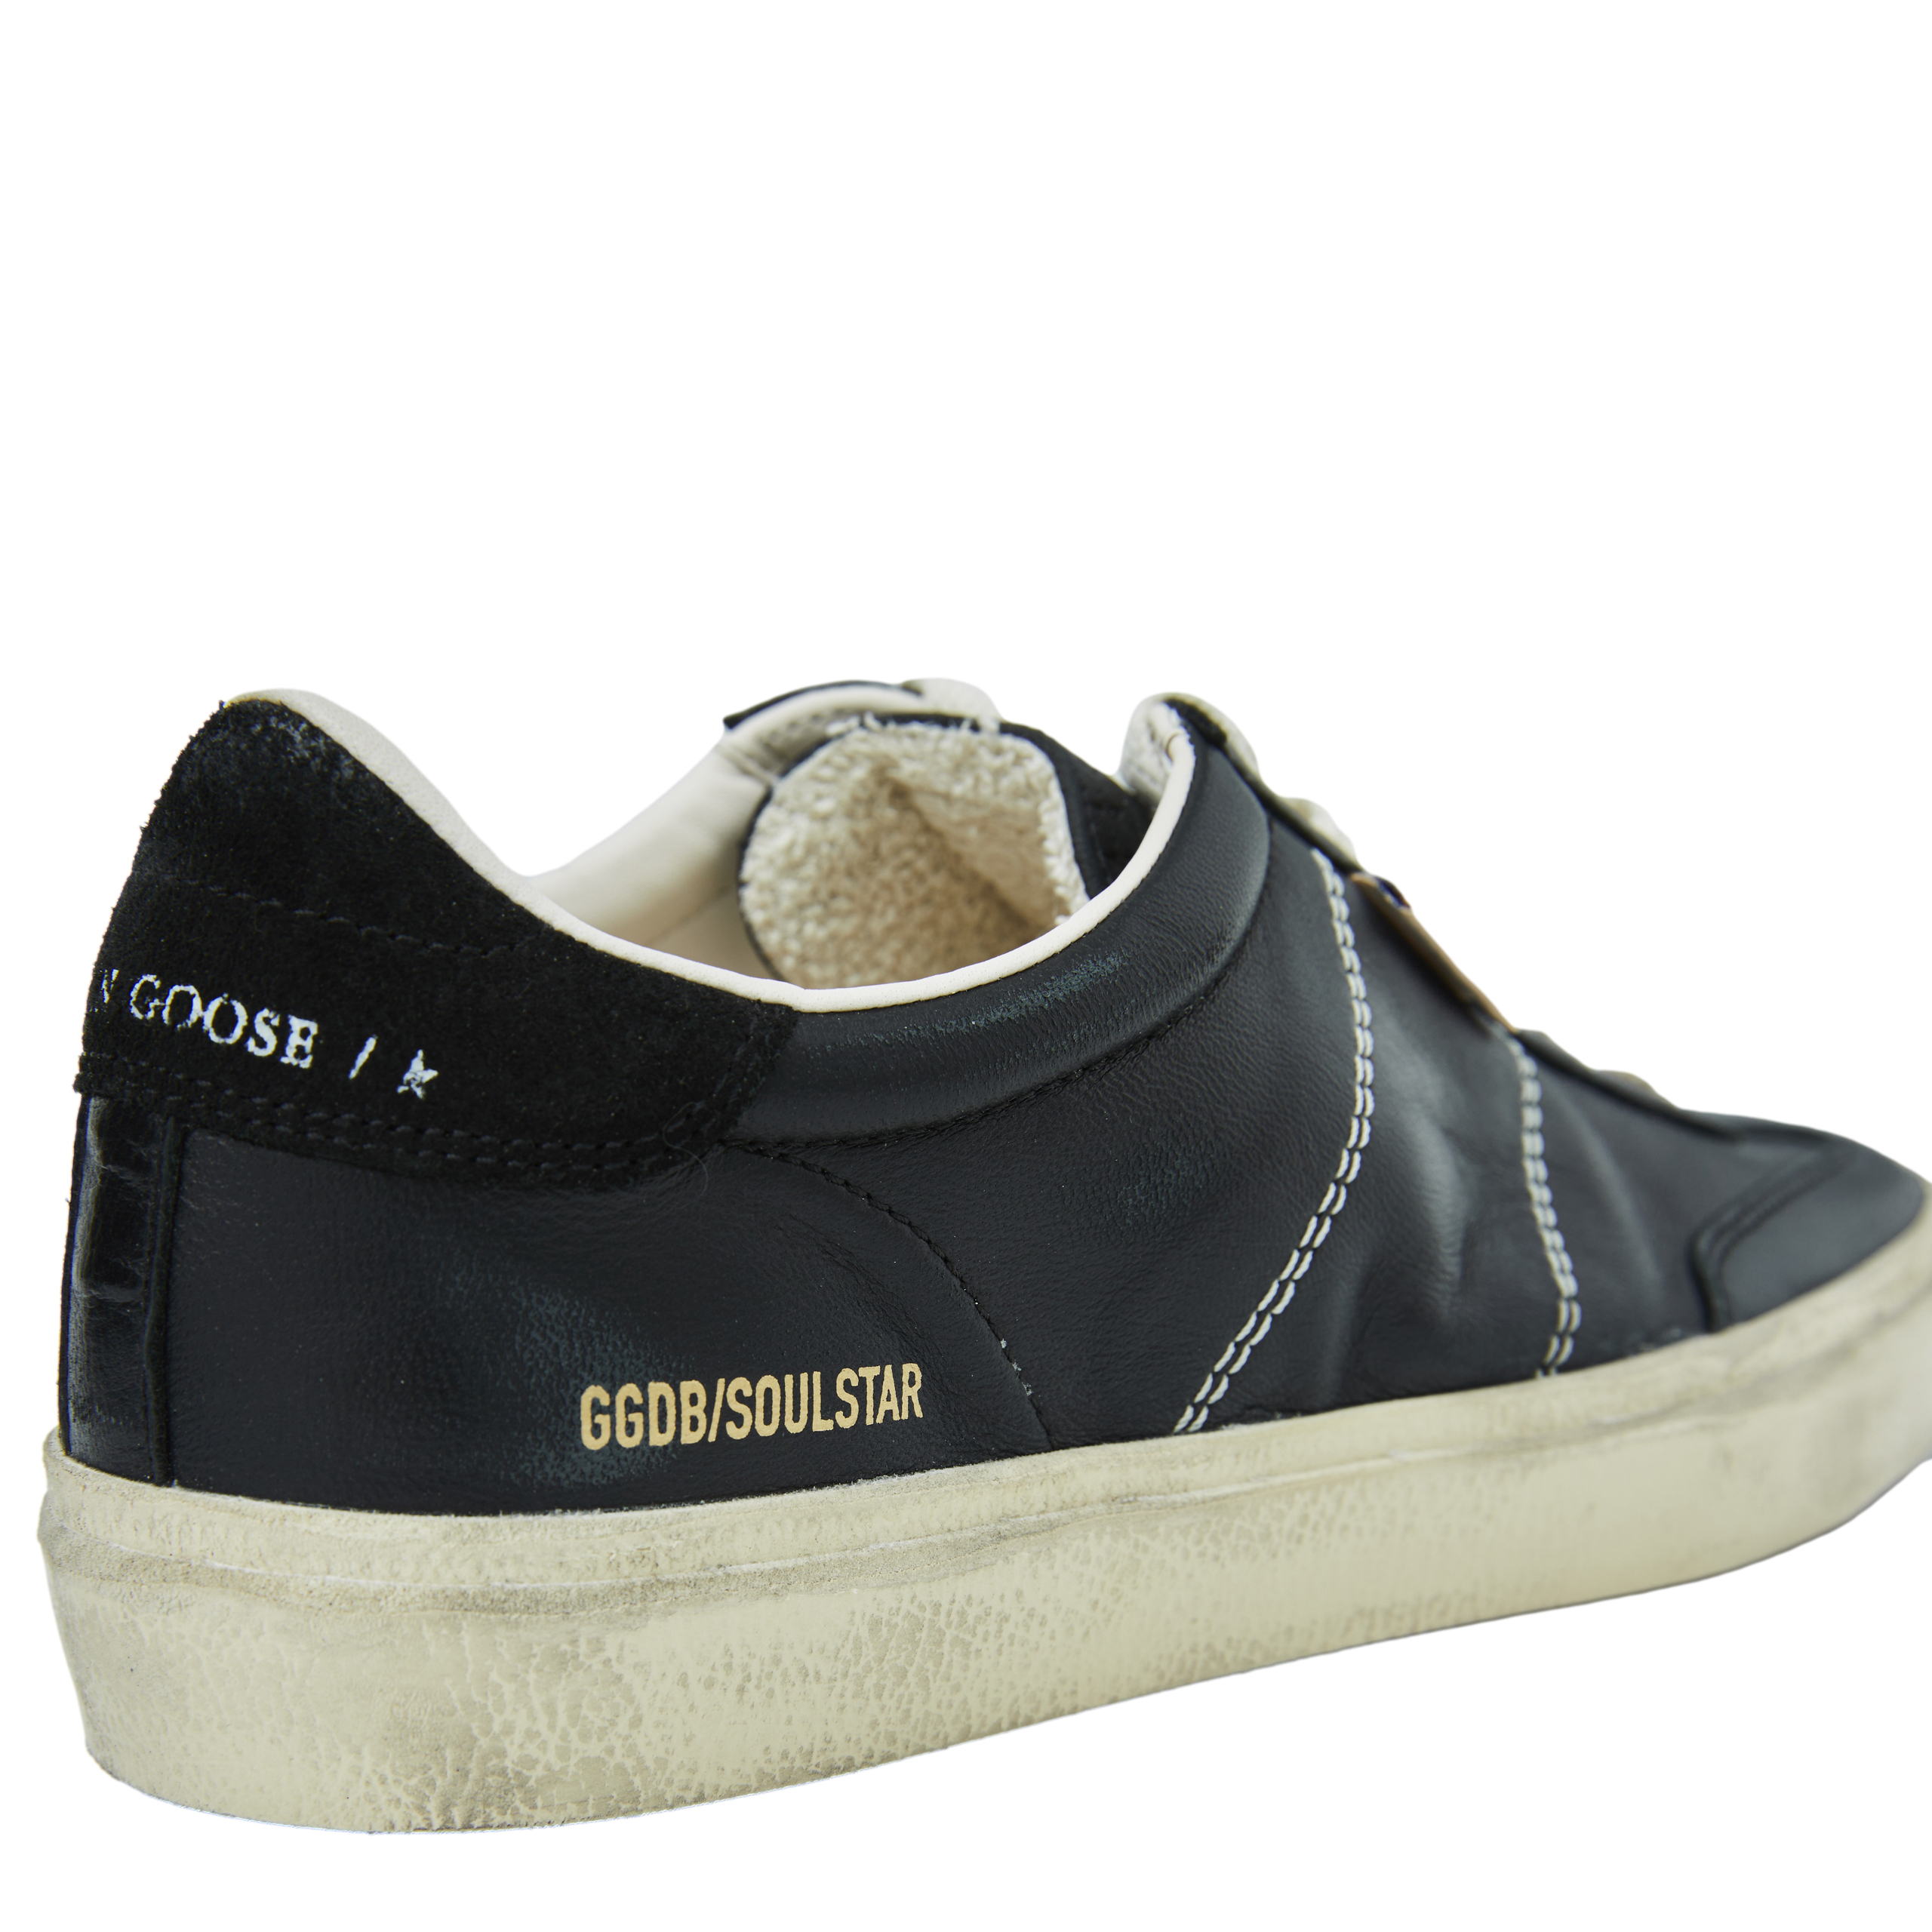 None Golden Goose Deluxe Brand GMF00464/F005050/90100/SS24, размер 41;42;43;44;45;46;44;45;46 GMF00464/F005050/90100/SS24 - фото 6